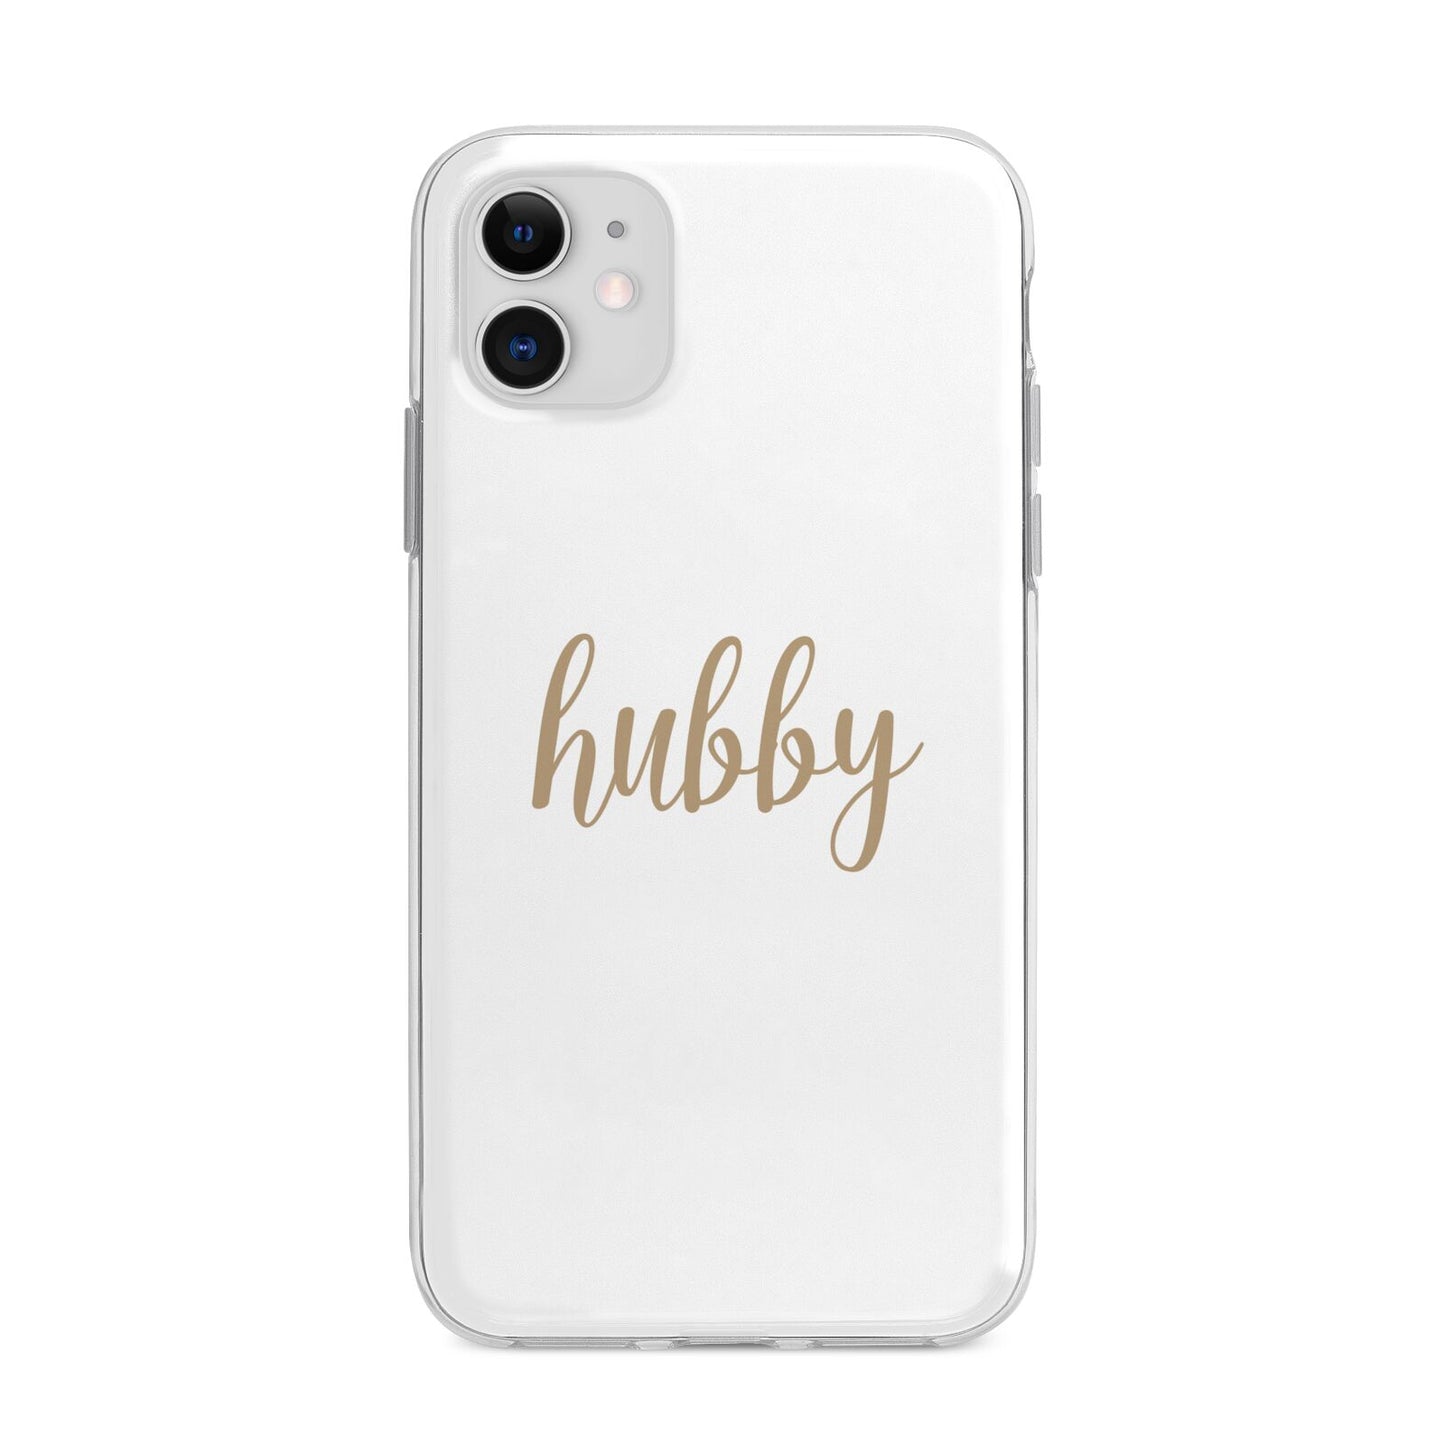 Hubby Apple iPhone 11 in White with Bumper Case